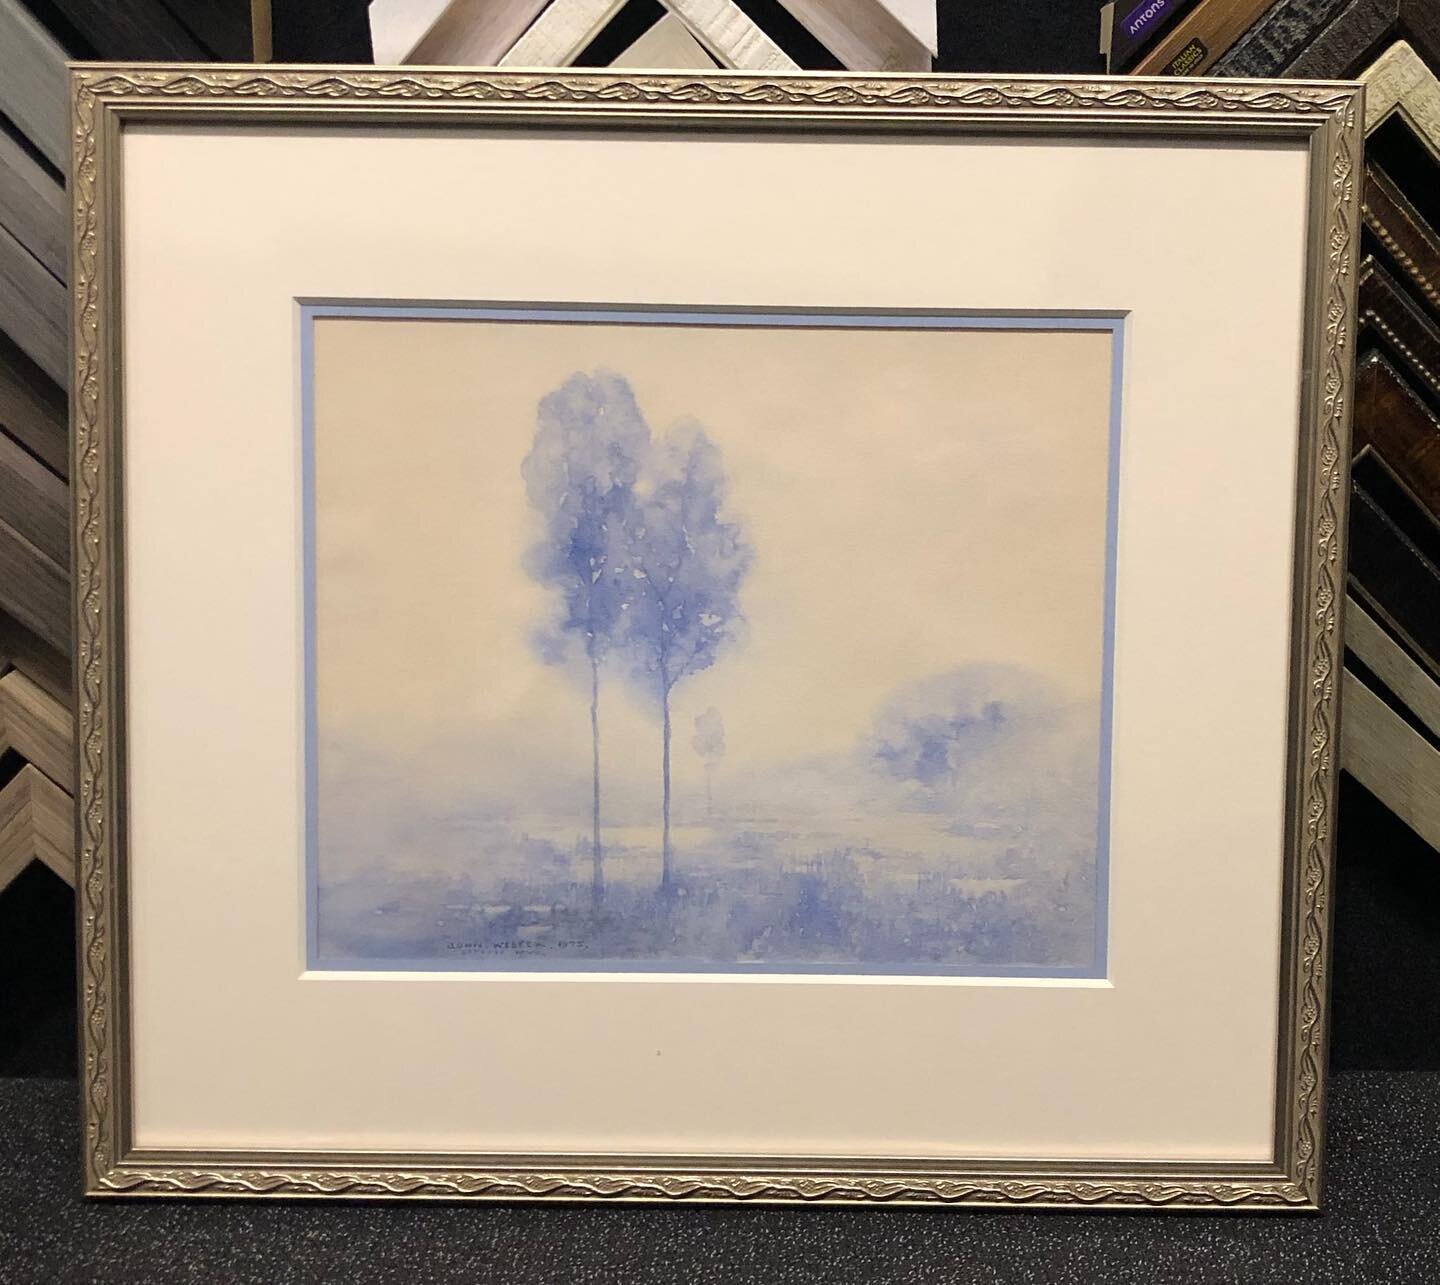 A gorgeous piece of art which we have recently been able to bring back to life and preserve for decades to come. Swipe for BEFORE ✨

#alburypictureframers #alburyframing #alburyframer #alburycbd #alburywodongabusiness #alburywodonga #alburypicturefra